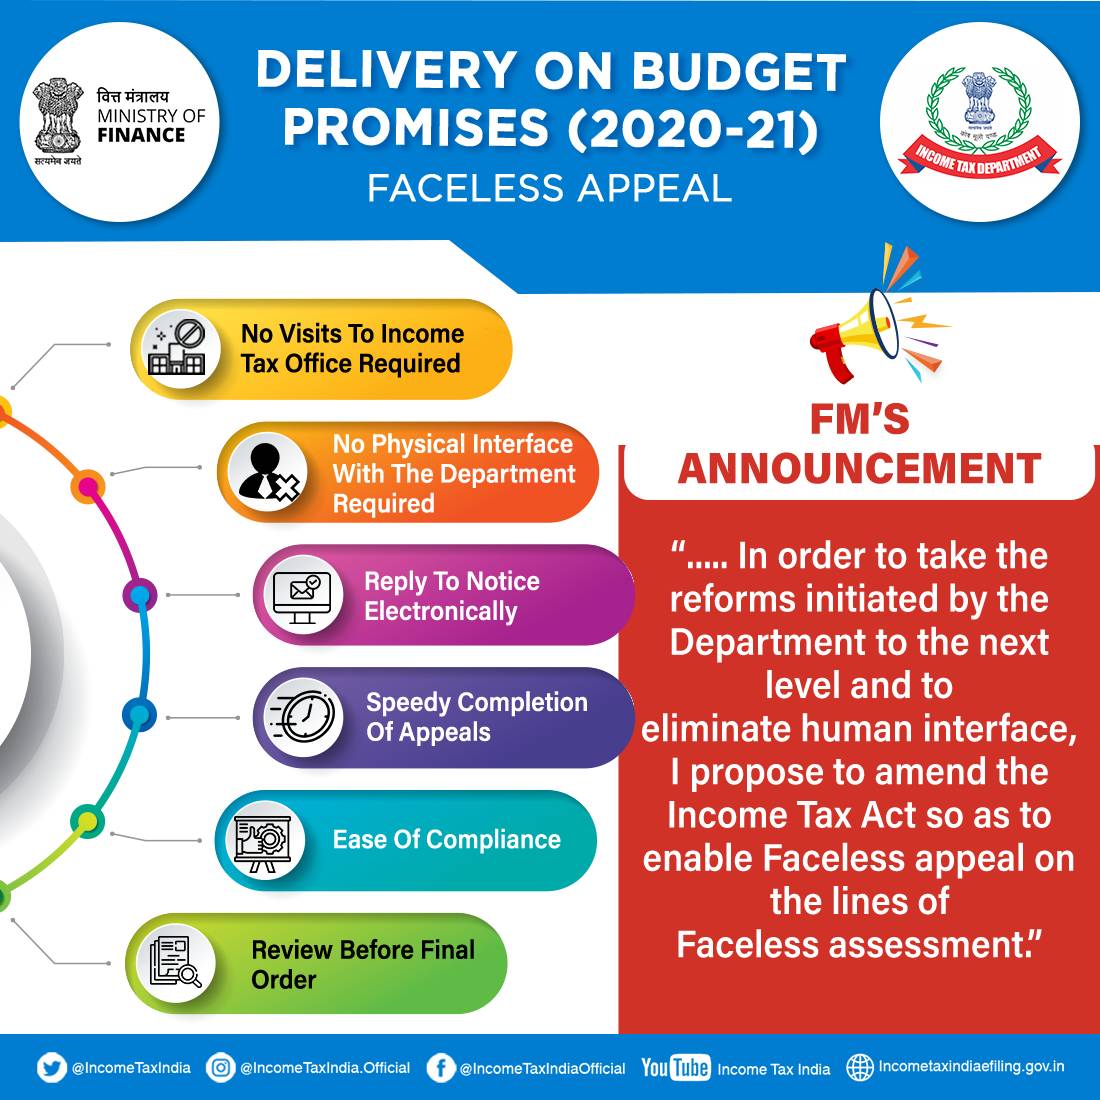 Re-strengthening economy through reforms: 
System of Faceless Appeals instituted. With features like e-allocation, e-submissions, e-hearing & e-Review, the scheme makes tax compliance easier, while also ensuring an objective, fair & just order.
#FacelessAppeals